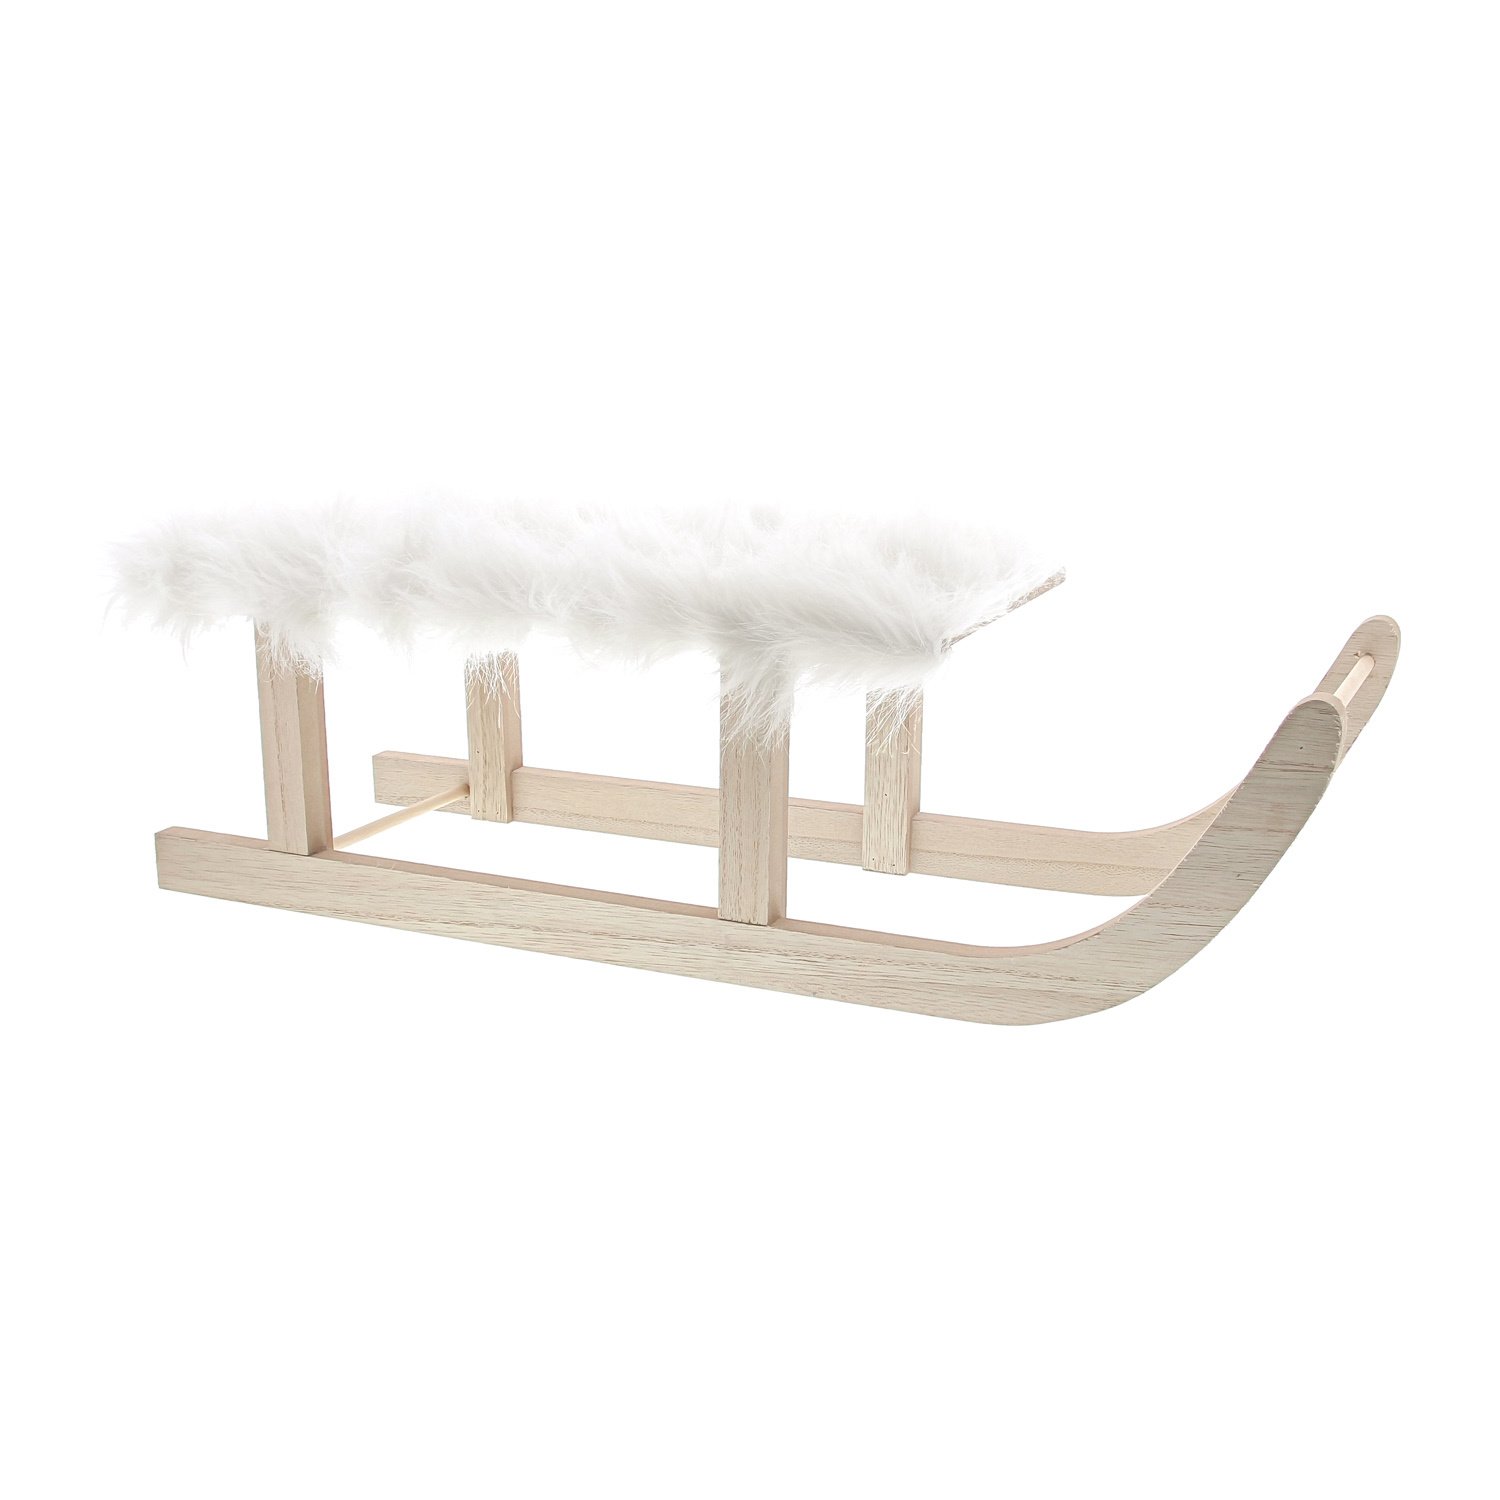 Sled "Softly" in wood with plush big - 482*180*150mm - 2 pieces